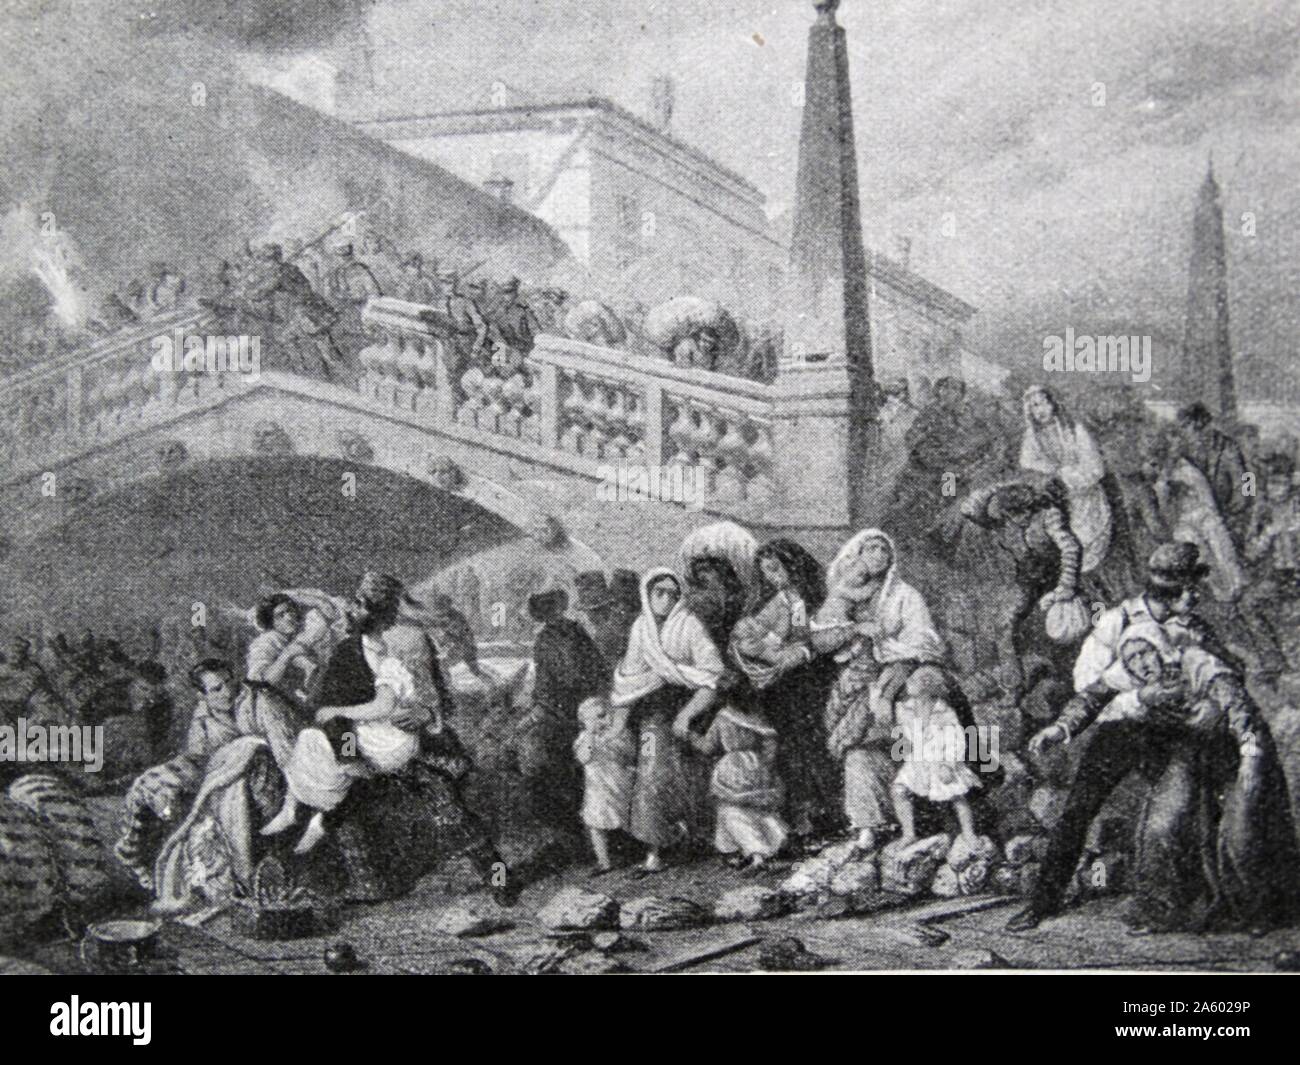 Venetian revolution against the Austrians. 'In the hope of re-establishing her ancient form of government under the presidency of Manin, Venice rose to revolt against Austria in 1848, but after a fifteen months' siege of the city the Austrians compelled it to capitulate.' by W. Glacomelli. Stock Photo